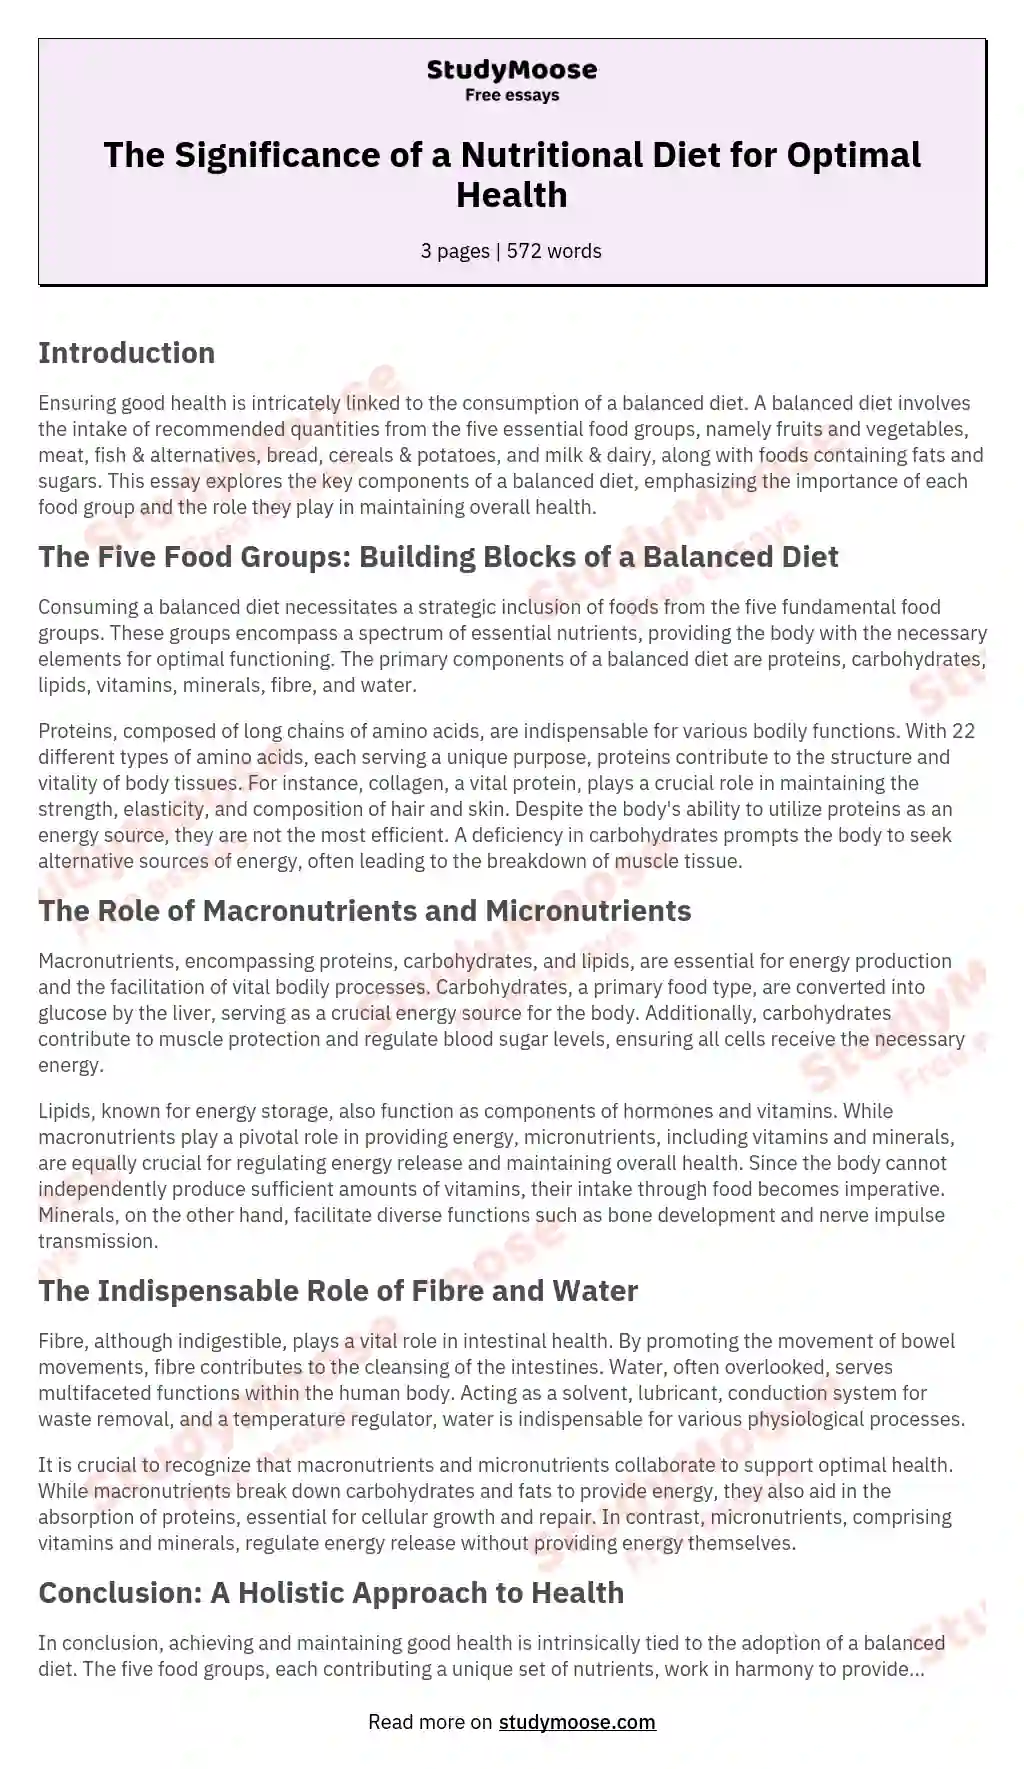 The Significance of a Nutritional Diet for Optimal Health essay